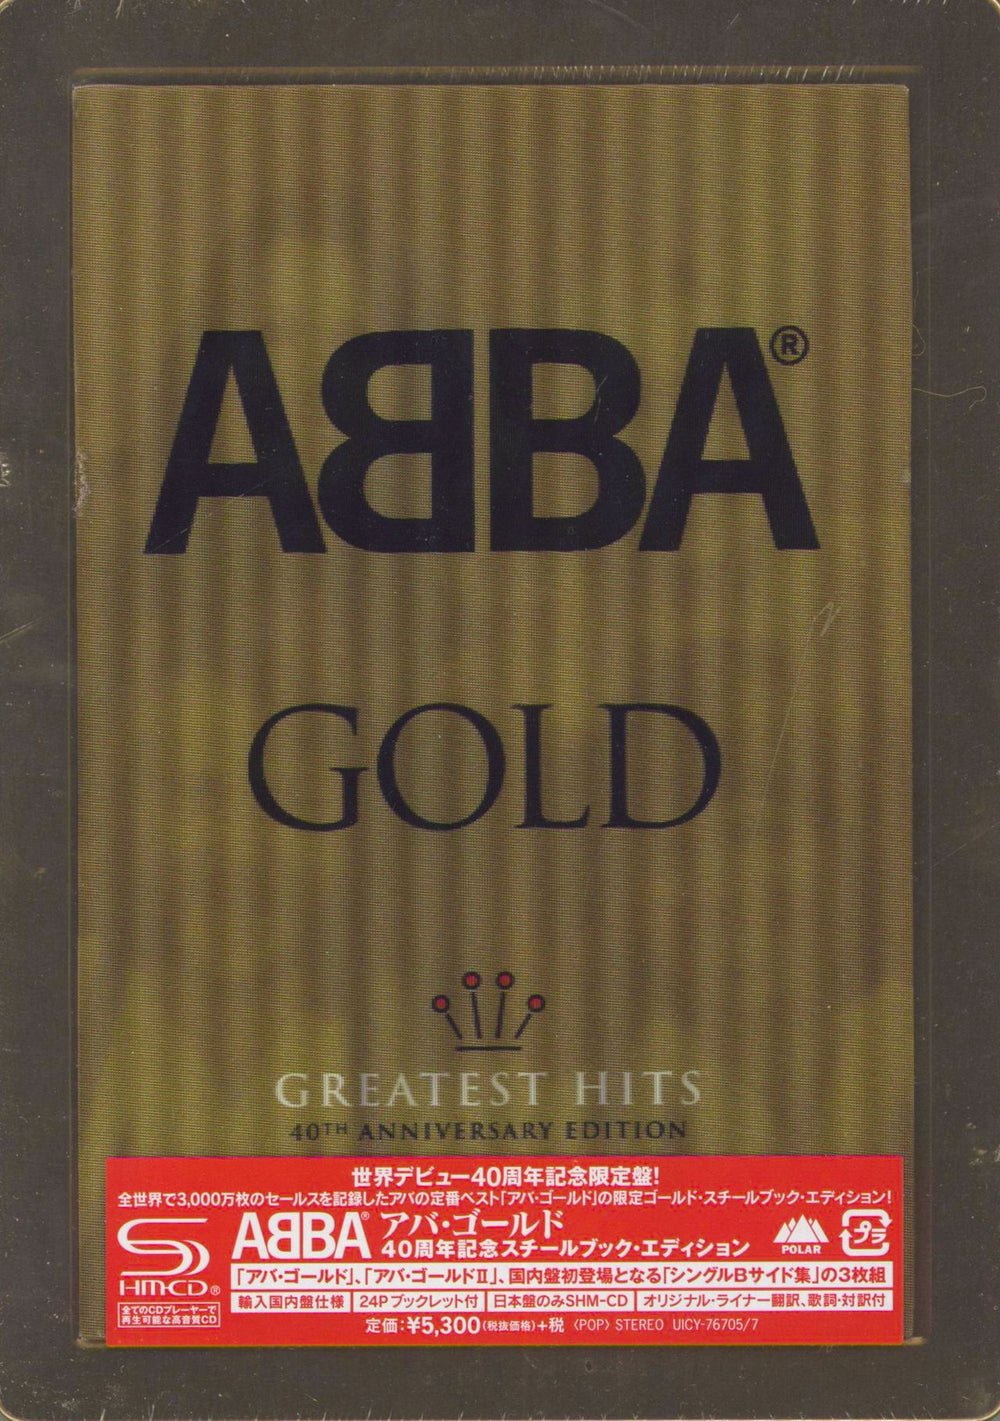 Abba Gold (Greatest Hits) - 40th Anniversary Steelbook - Sealed Japanese SHM CD UICY-76705/7